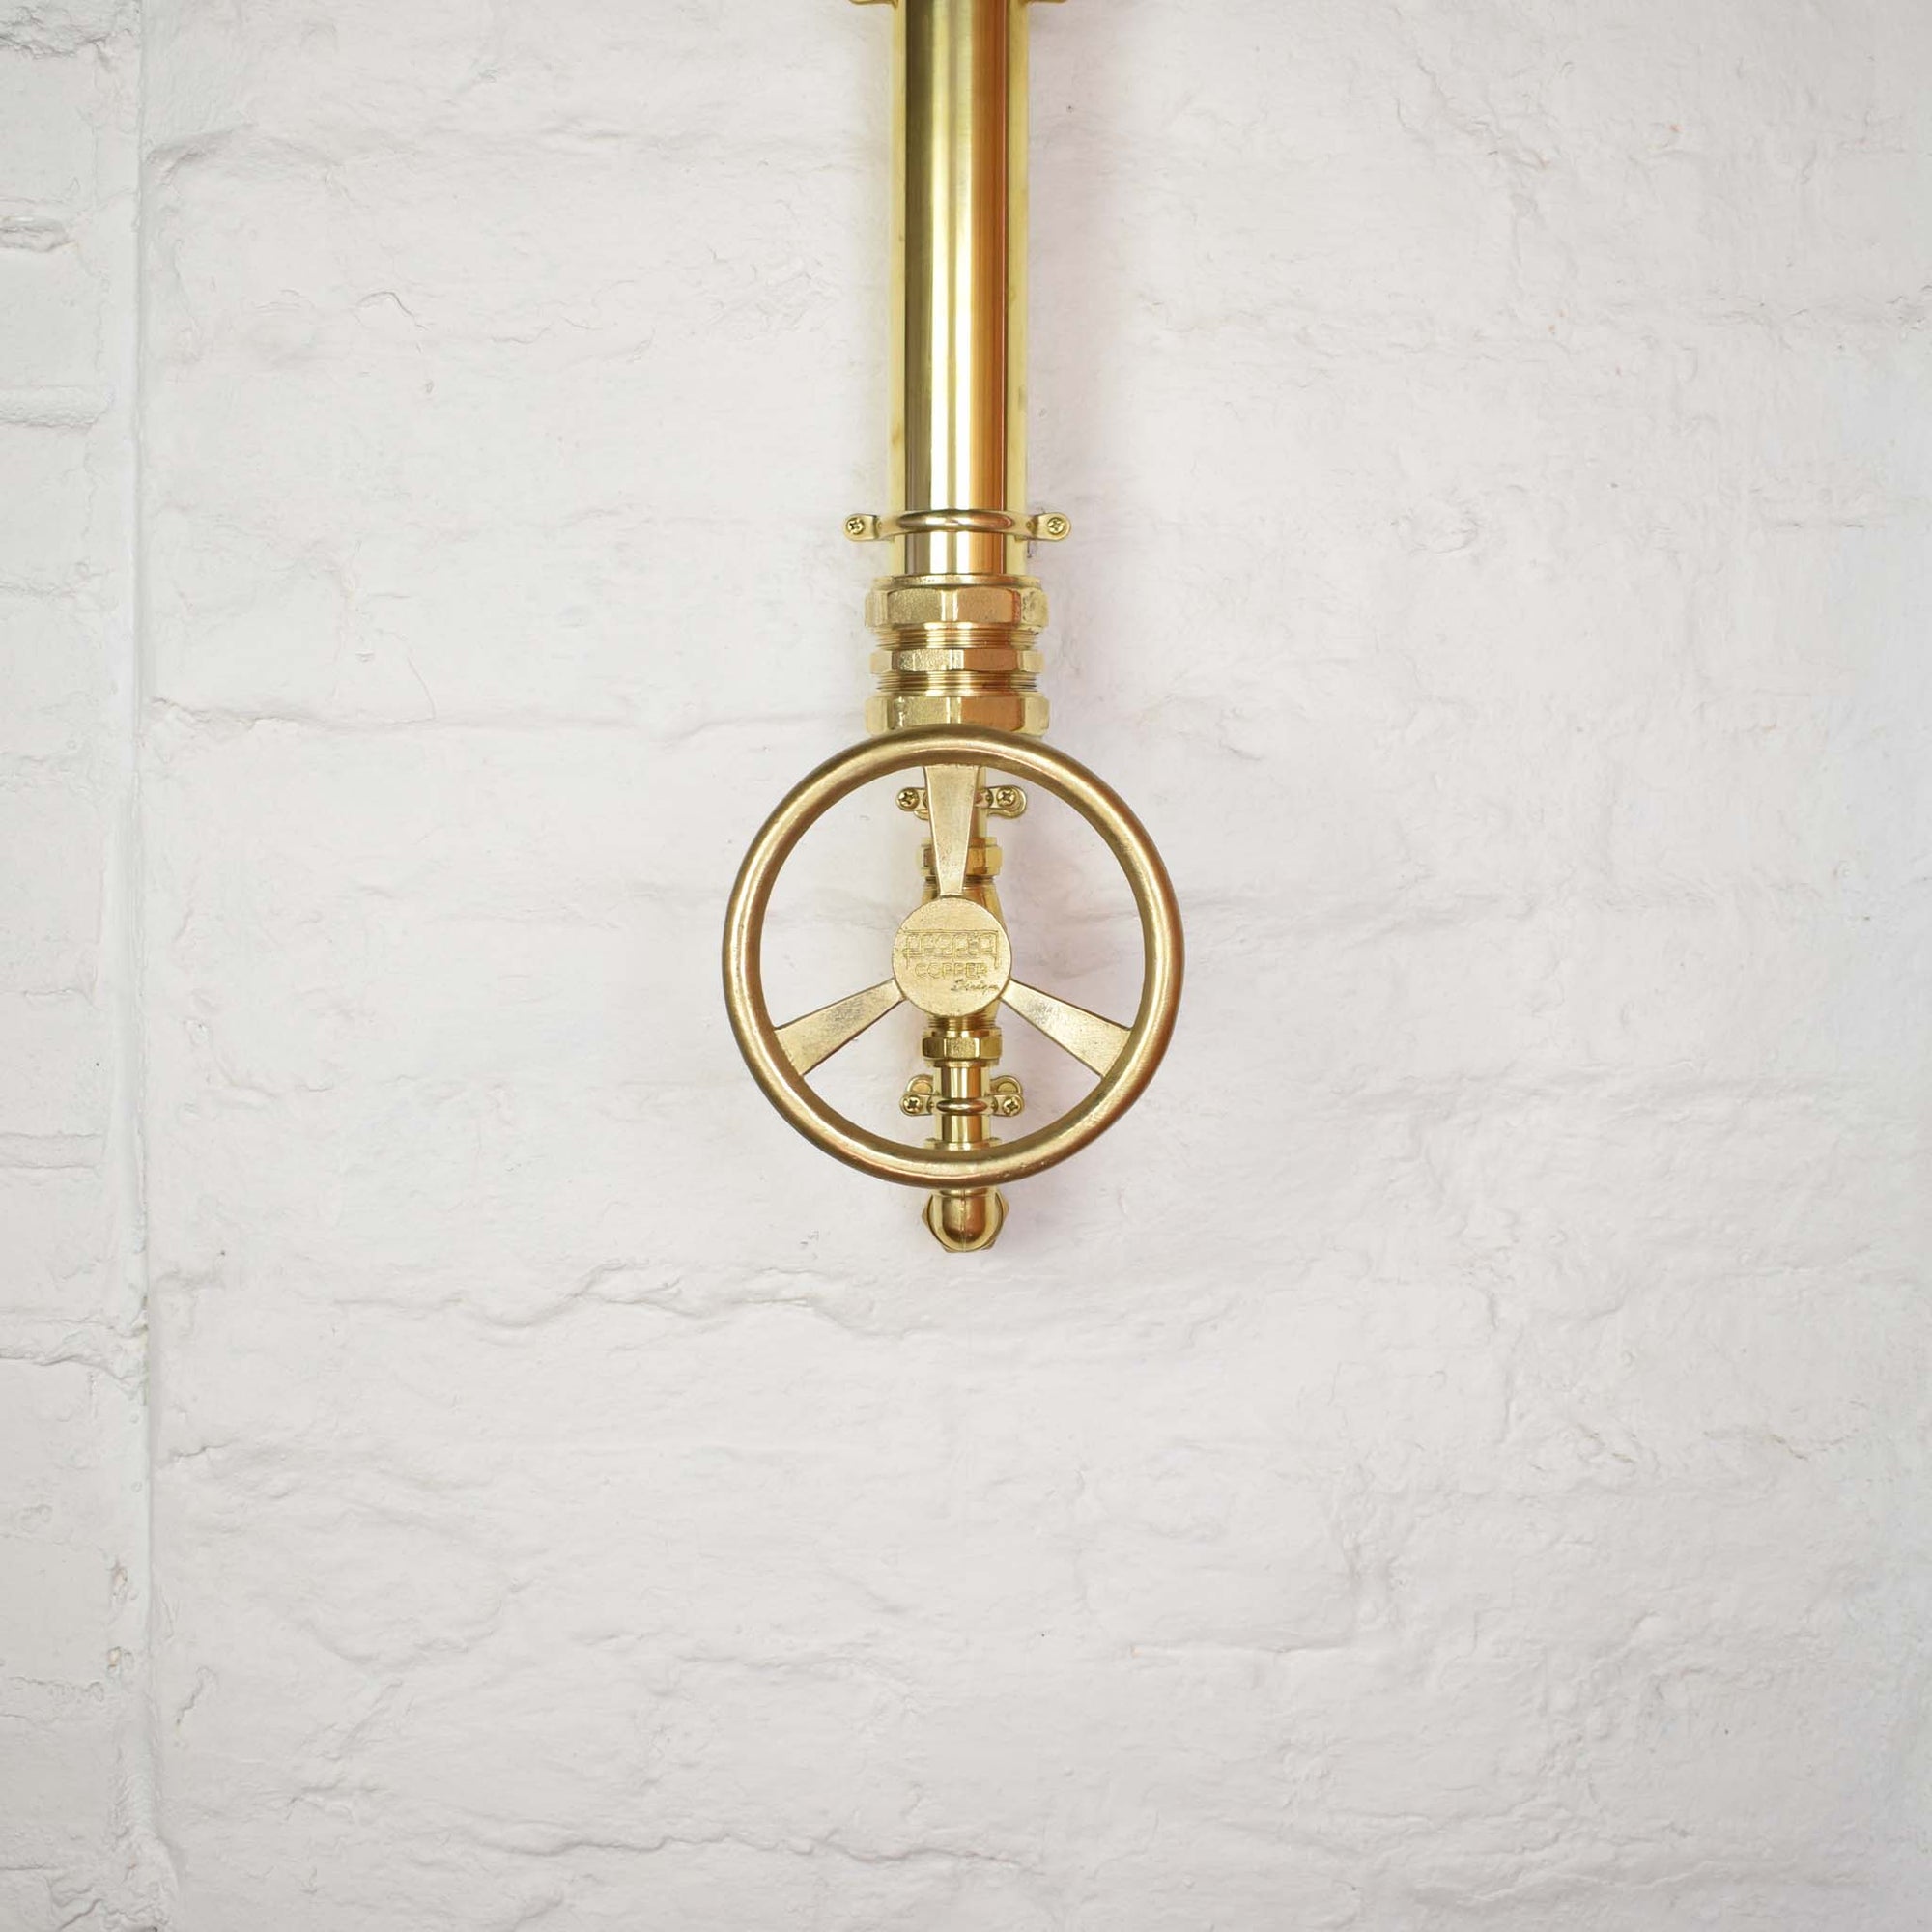 custom taps UK, featured on a new shower designs